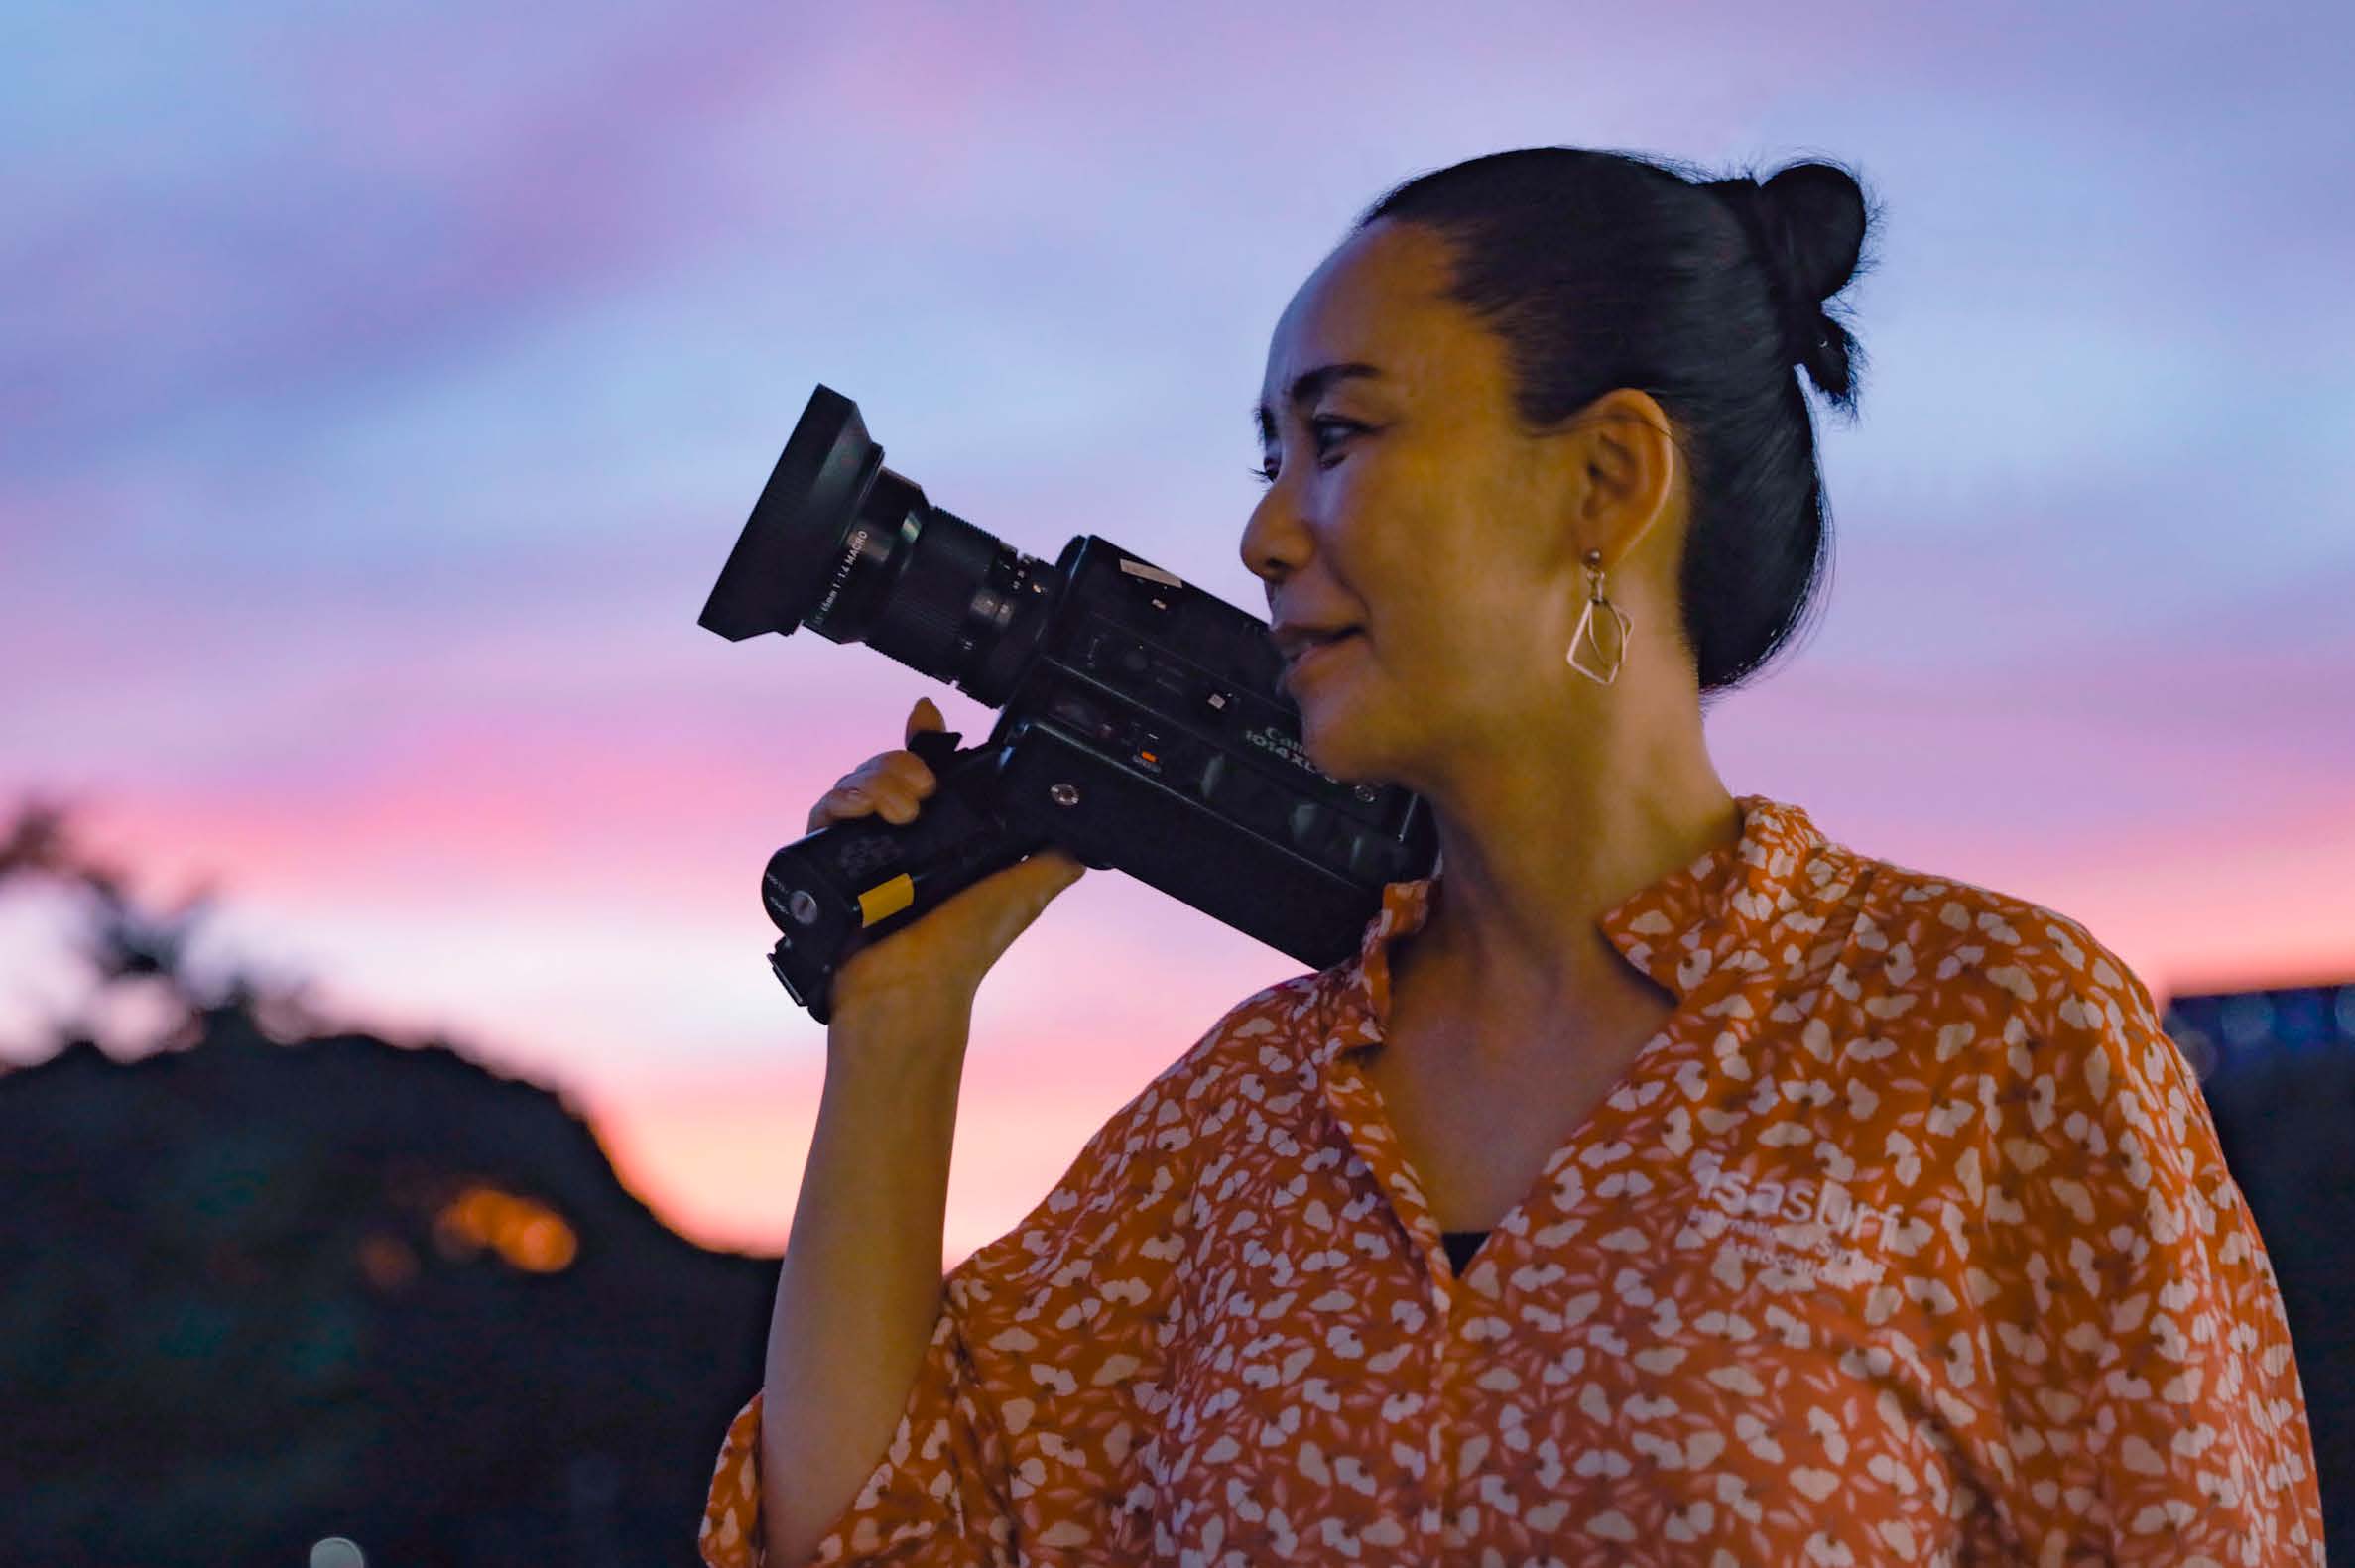 Naomi Kawase with her 8mm camera. ©2022 International Olympic Committee. All Rights Reserved.